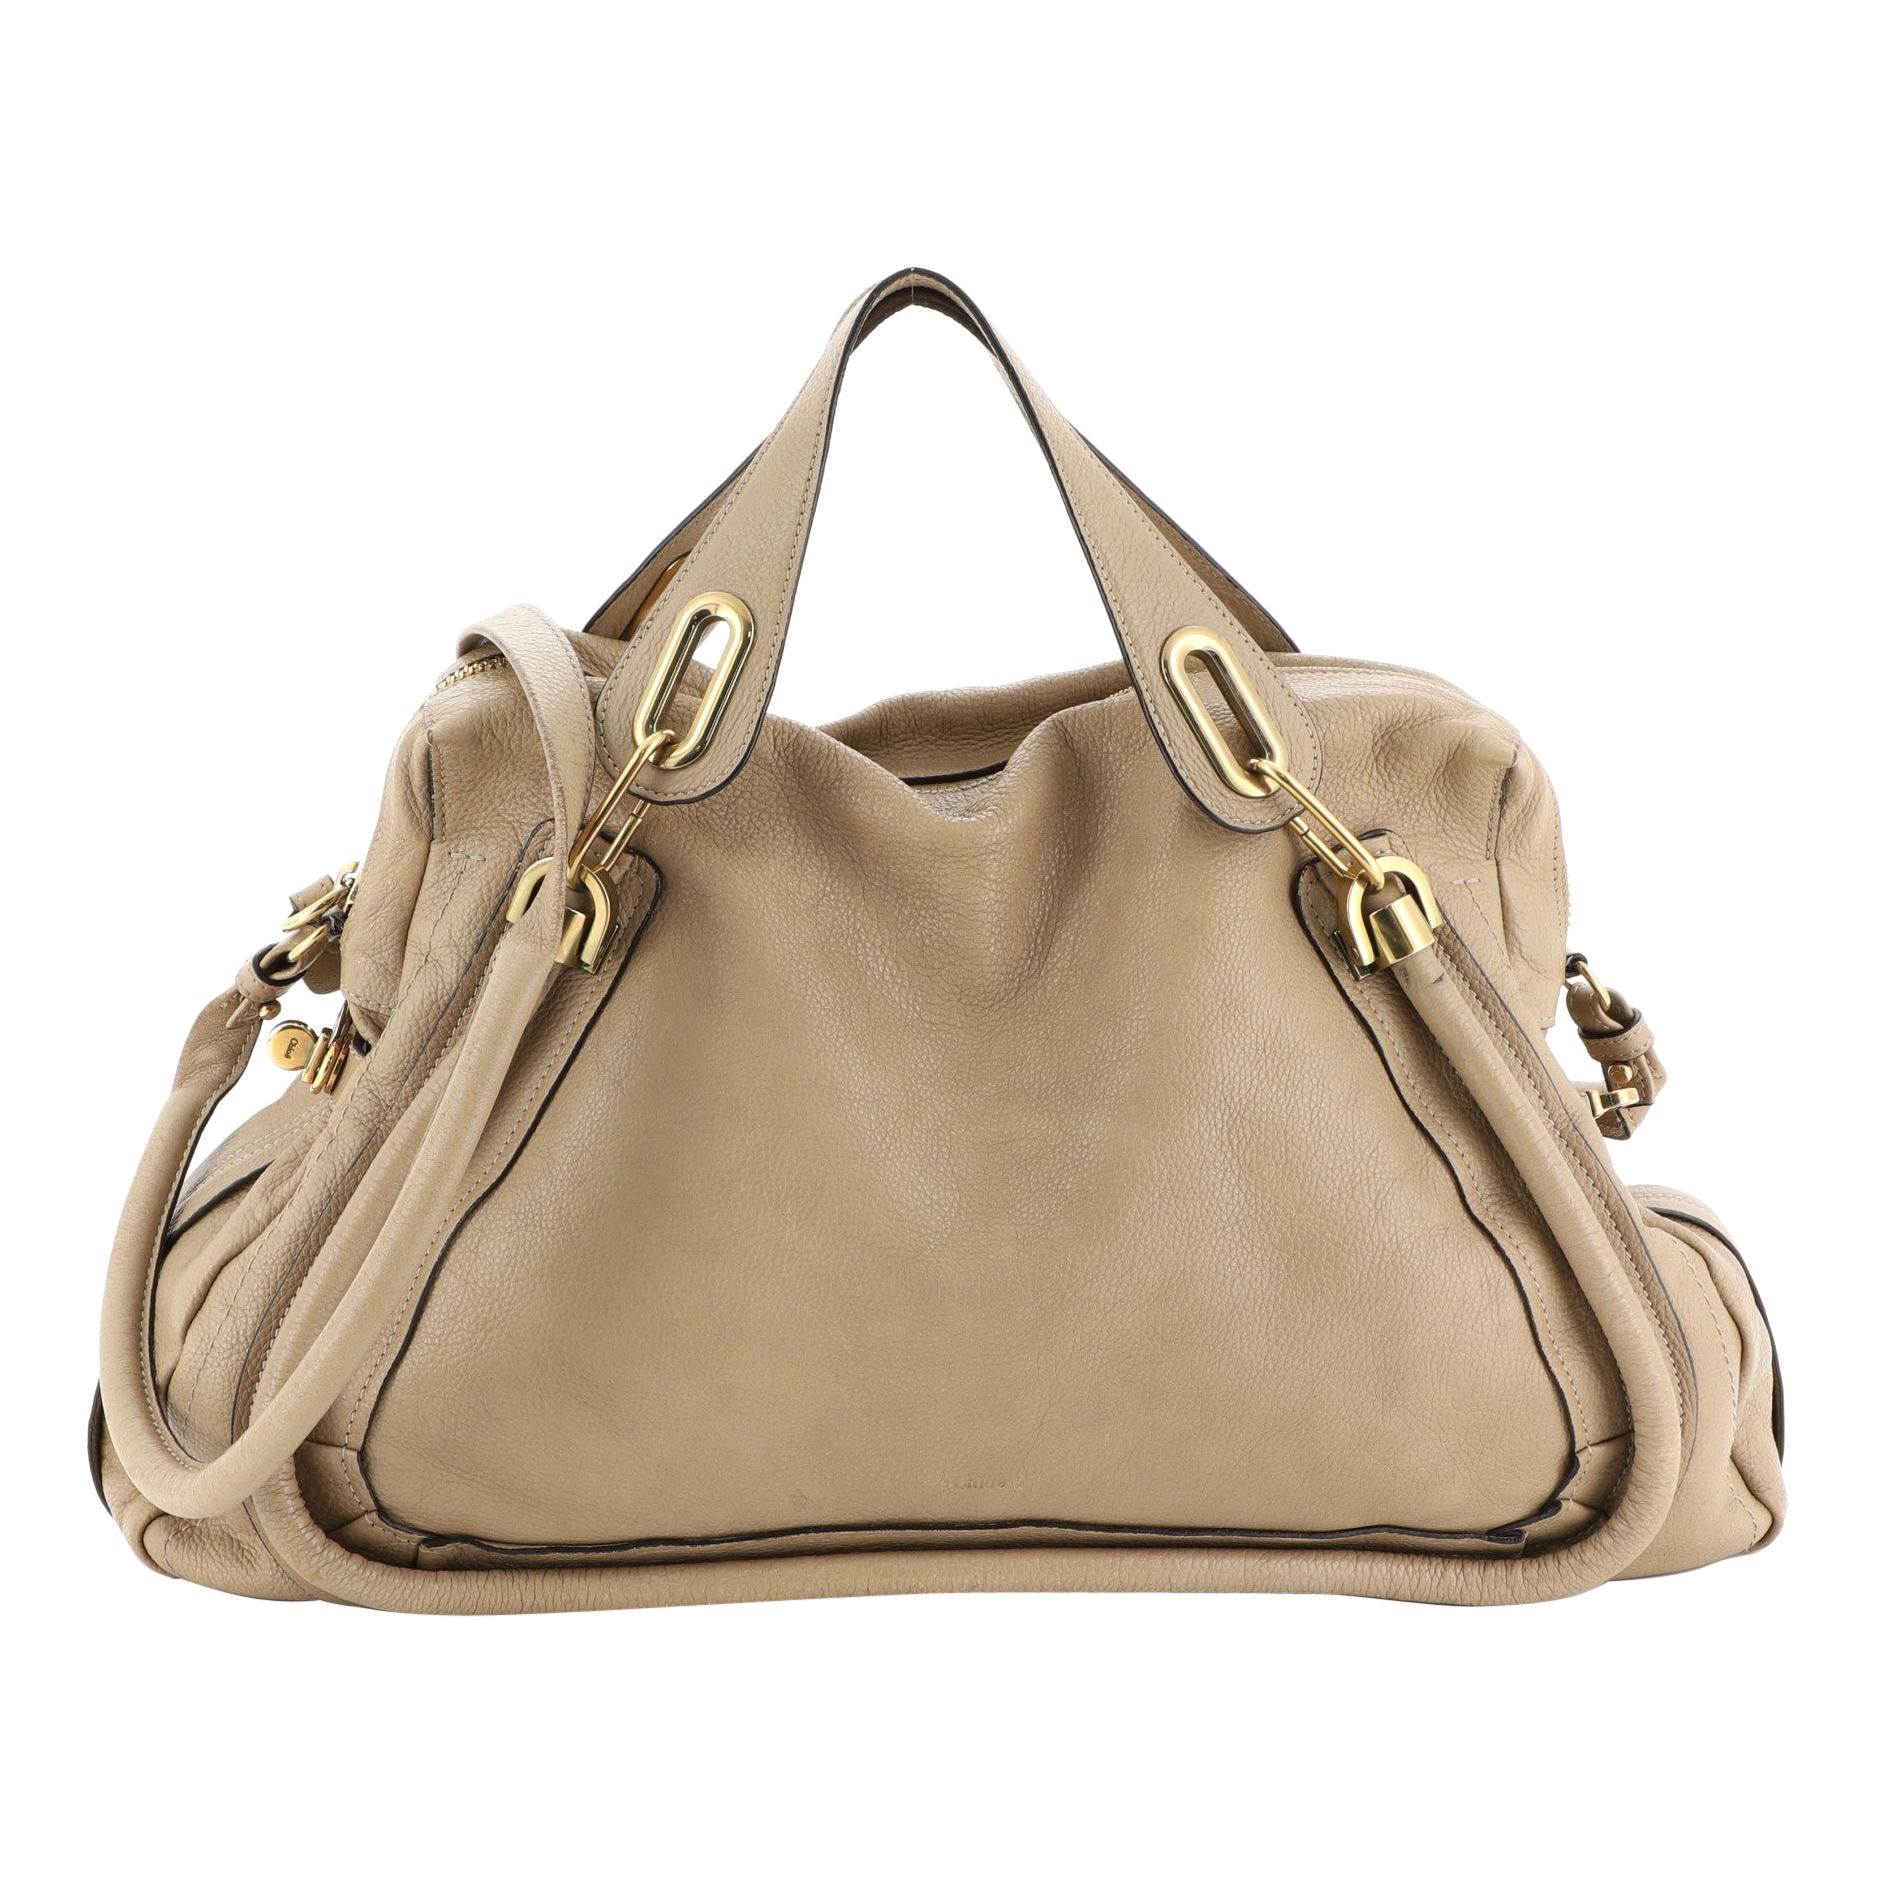 Chloe Paraty Top Handle Bag Leather Large